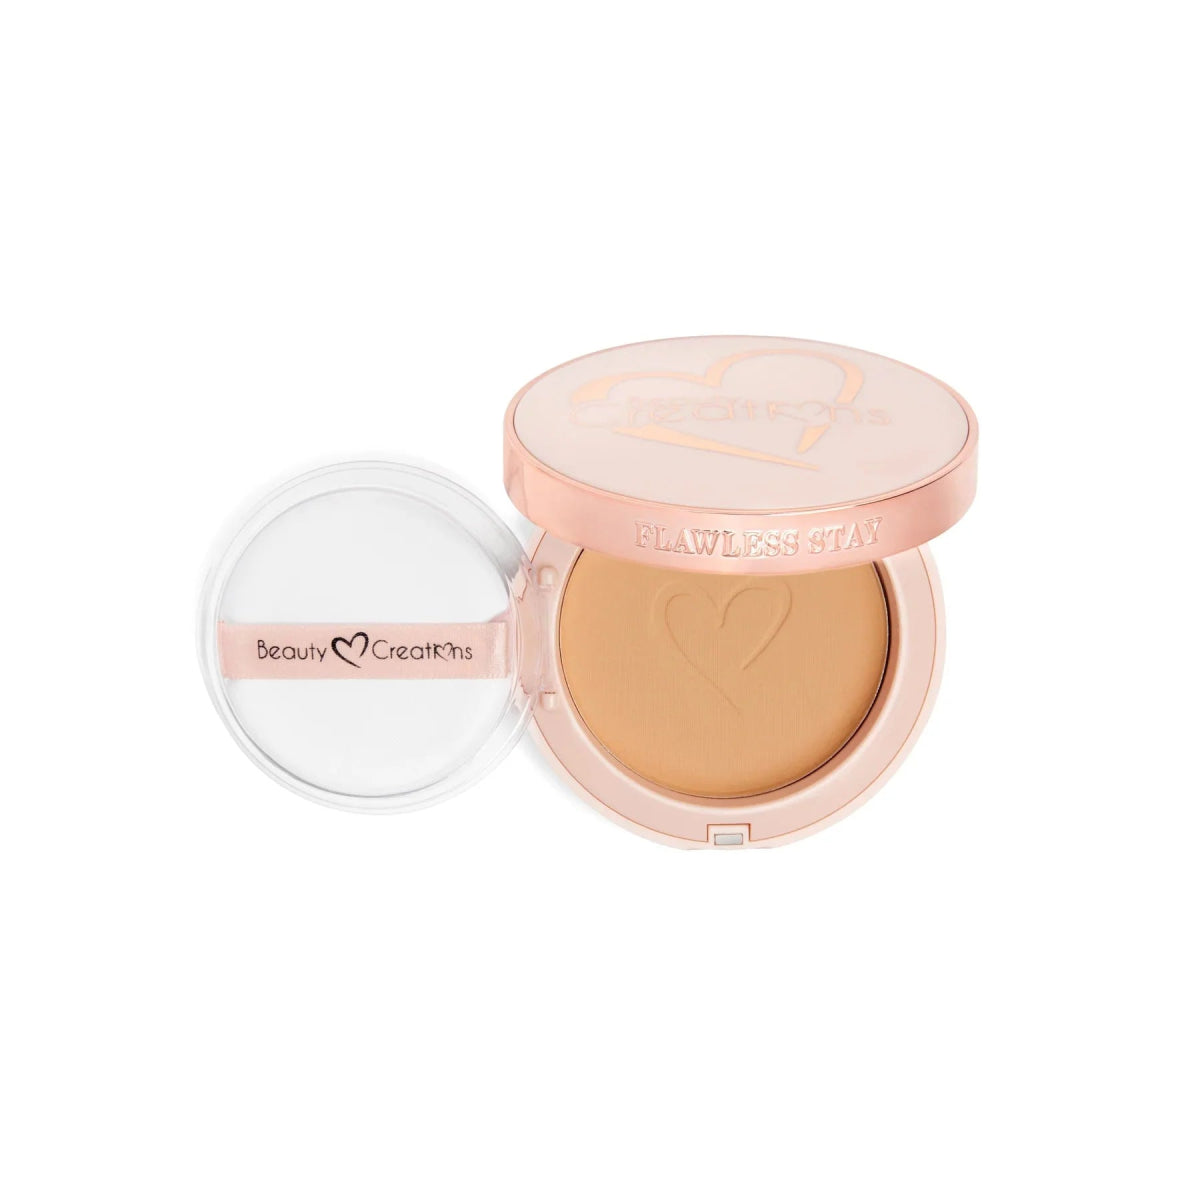 BCC Backup-Cosmetics-Beauty Creations - Base En Polvo Flawless Stay - Polvo Compacto-FSP7.5